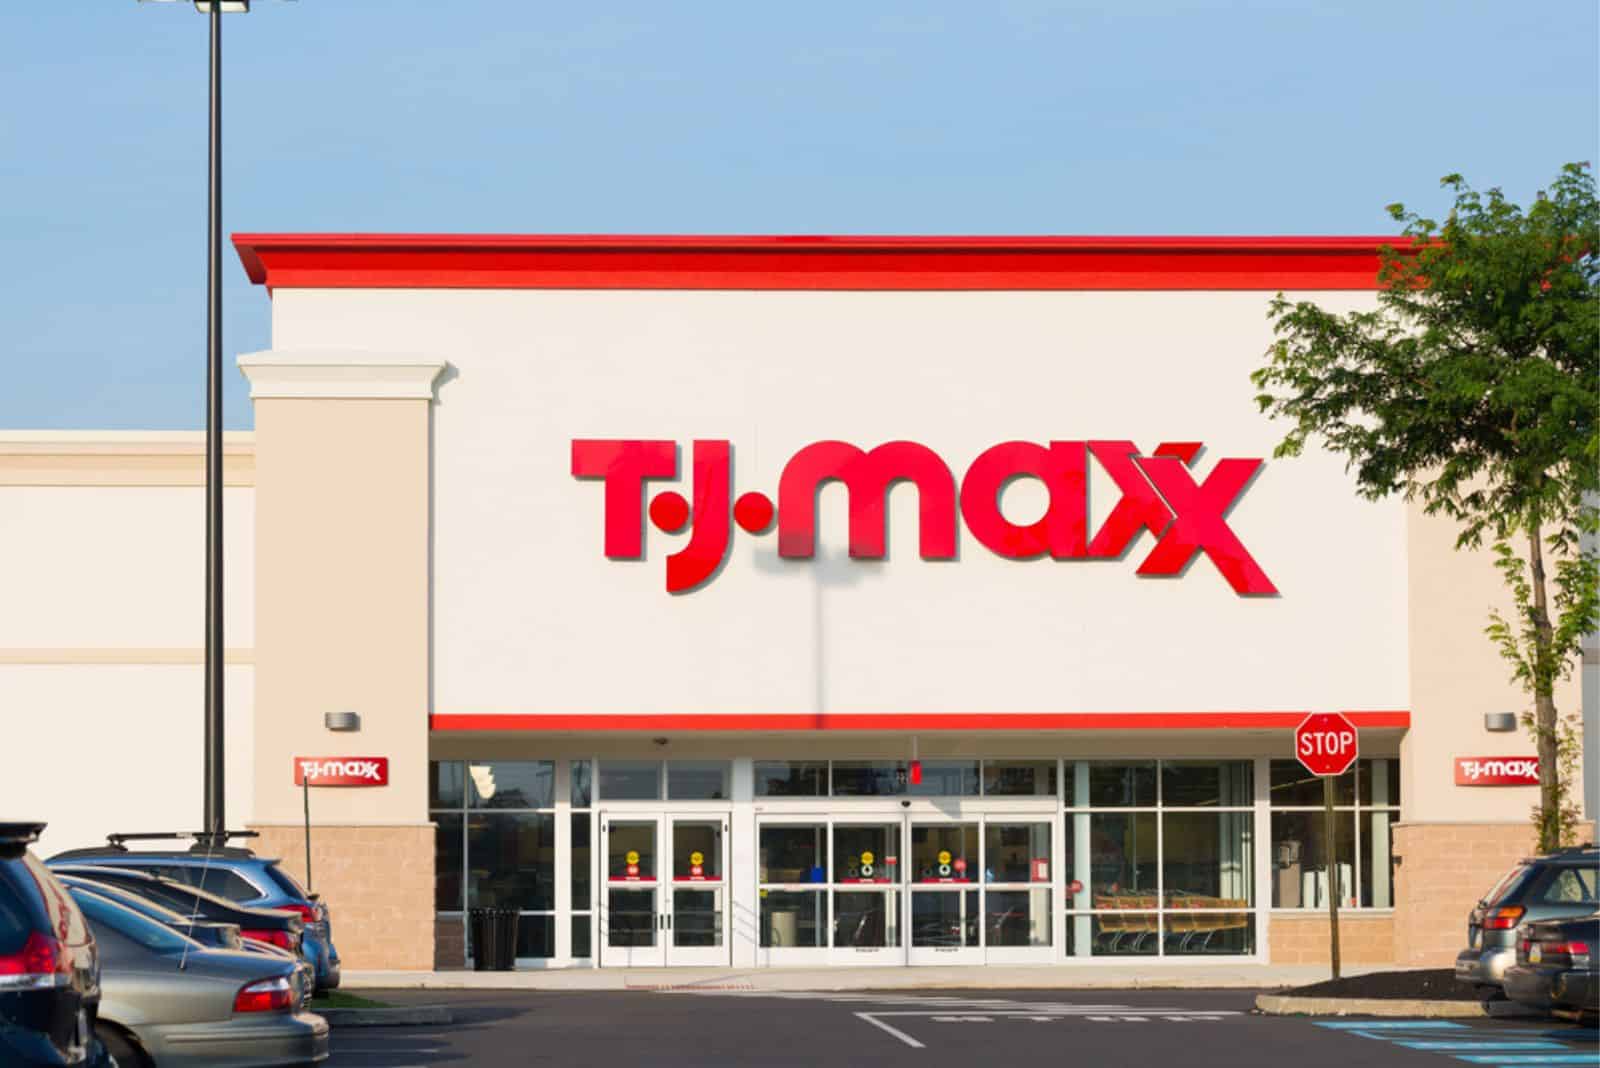 Is TJ Maxx Dog Friendly? Going Shopping With Your Dog